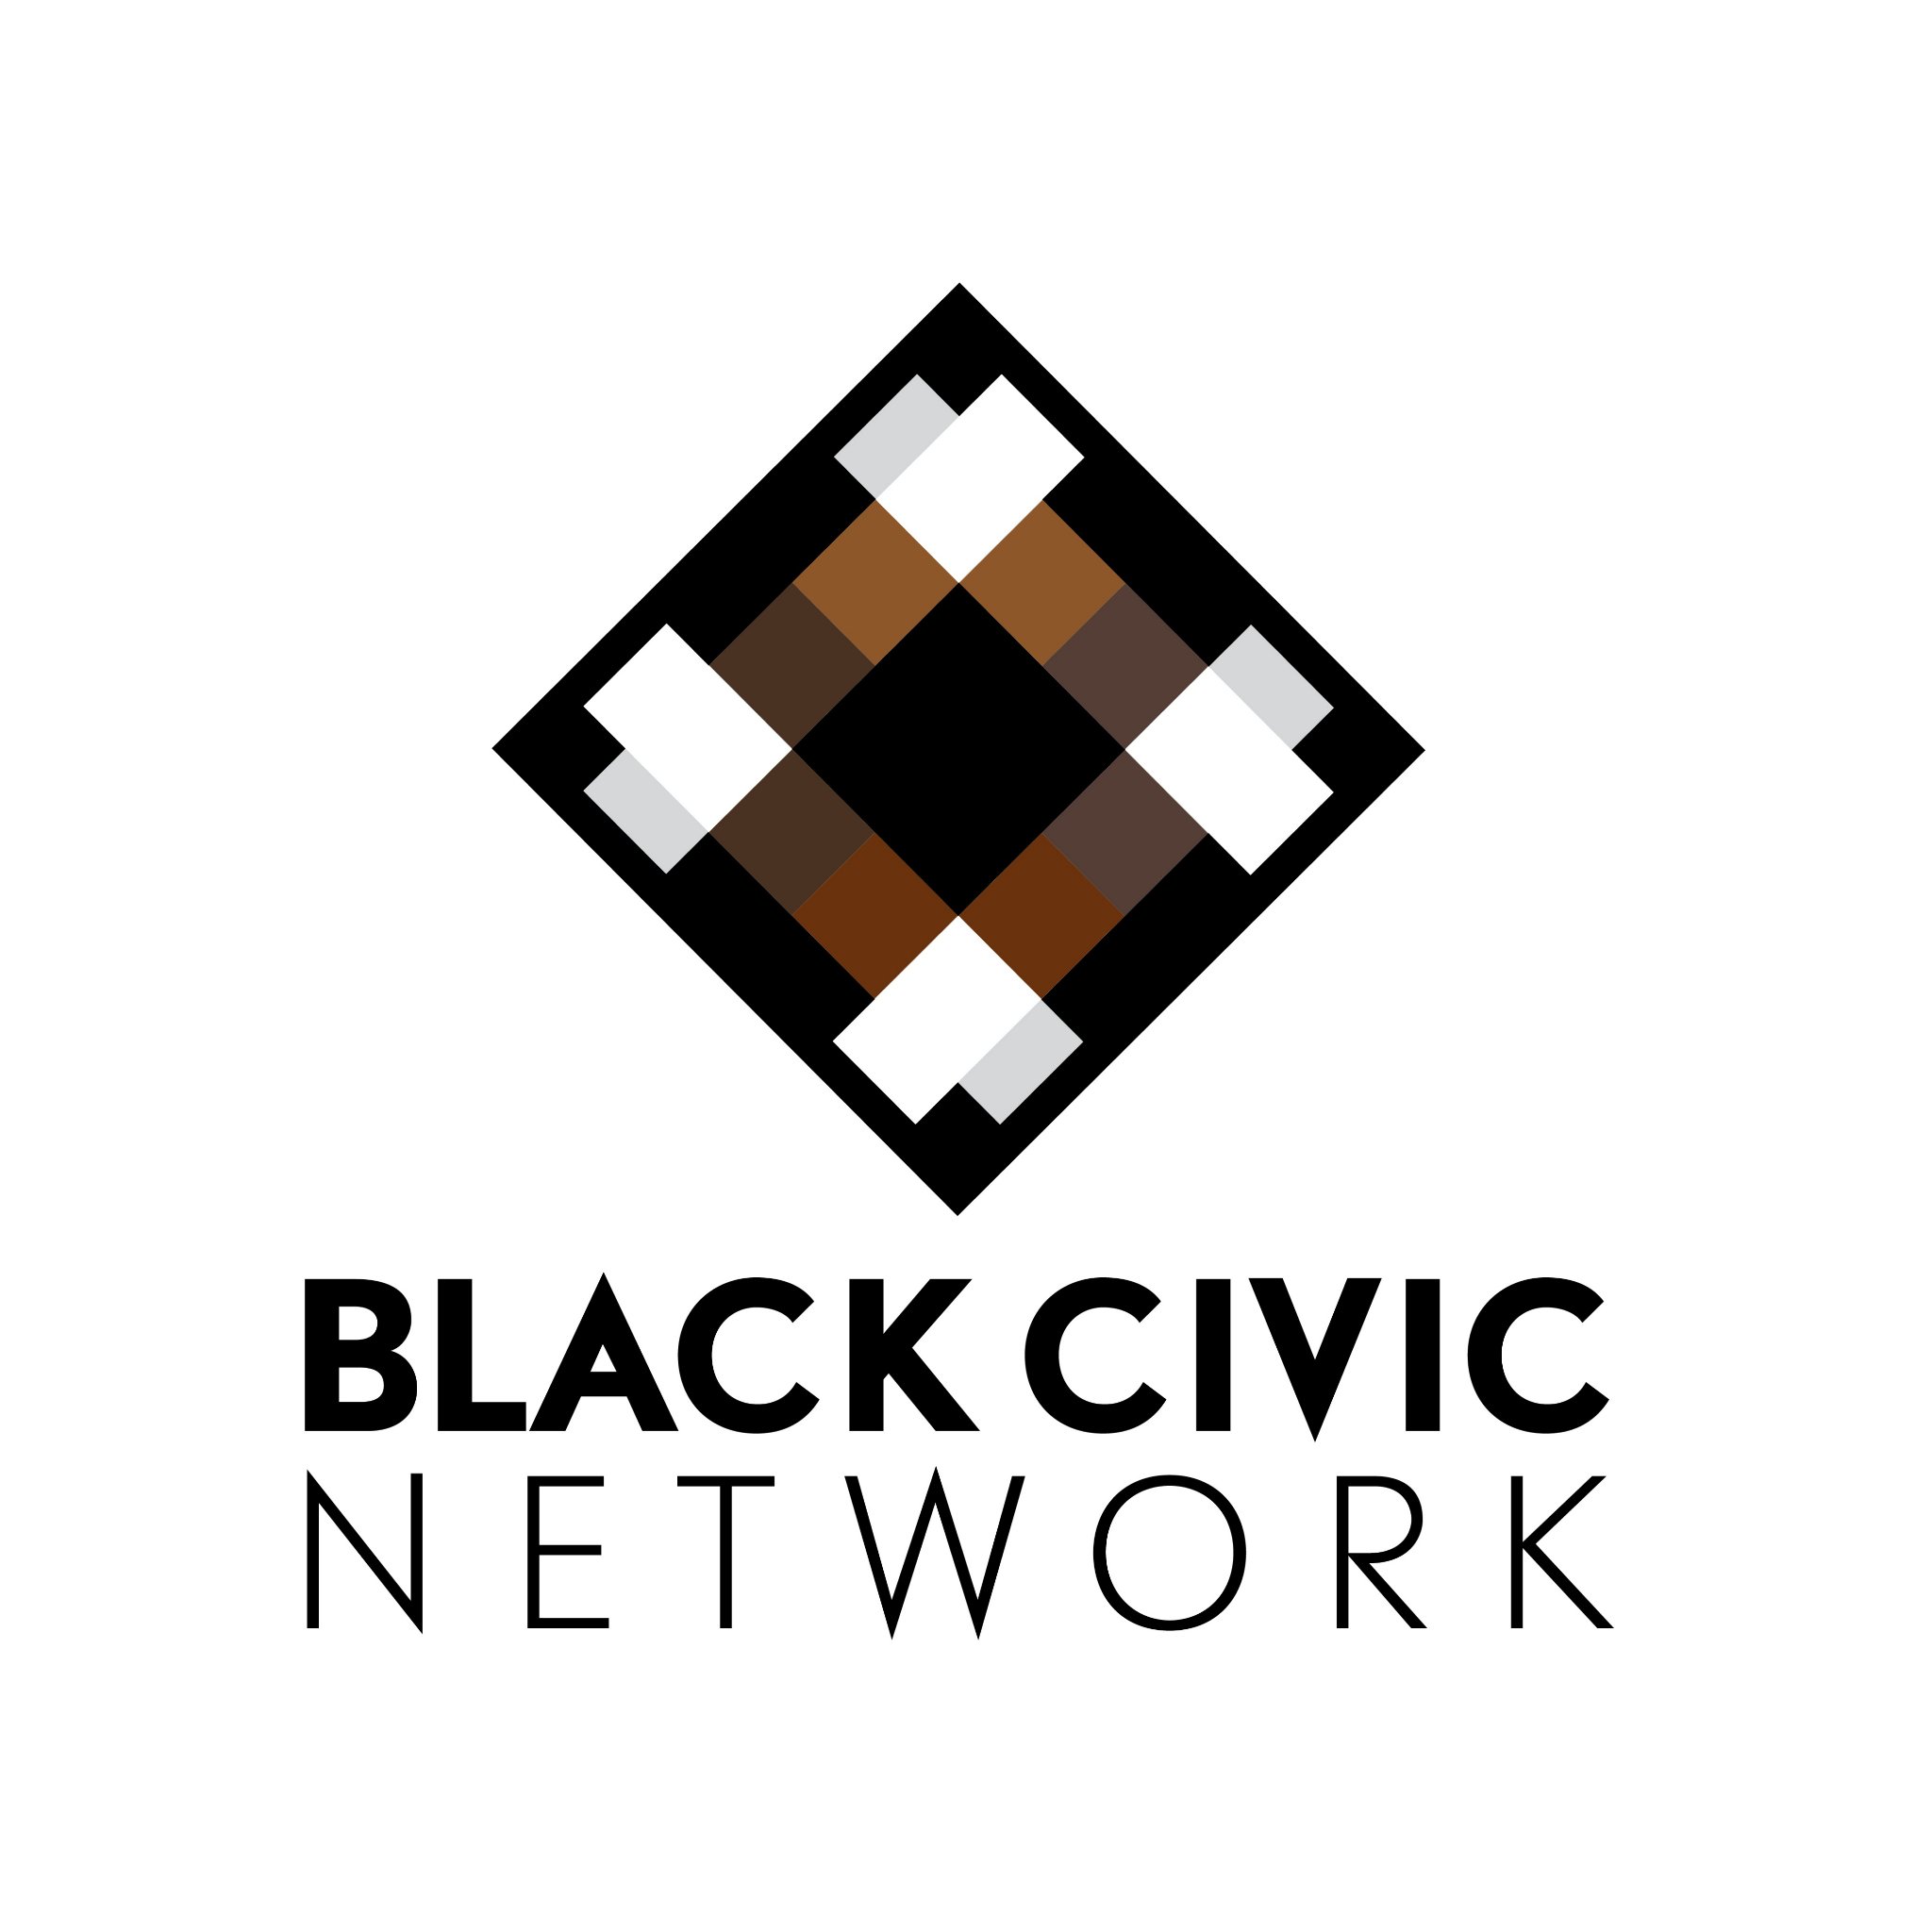 The purpose of Black Civic Network (BCN) is to champion and represent the ADOS communities interest in action. We are here to build a permanent community.